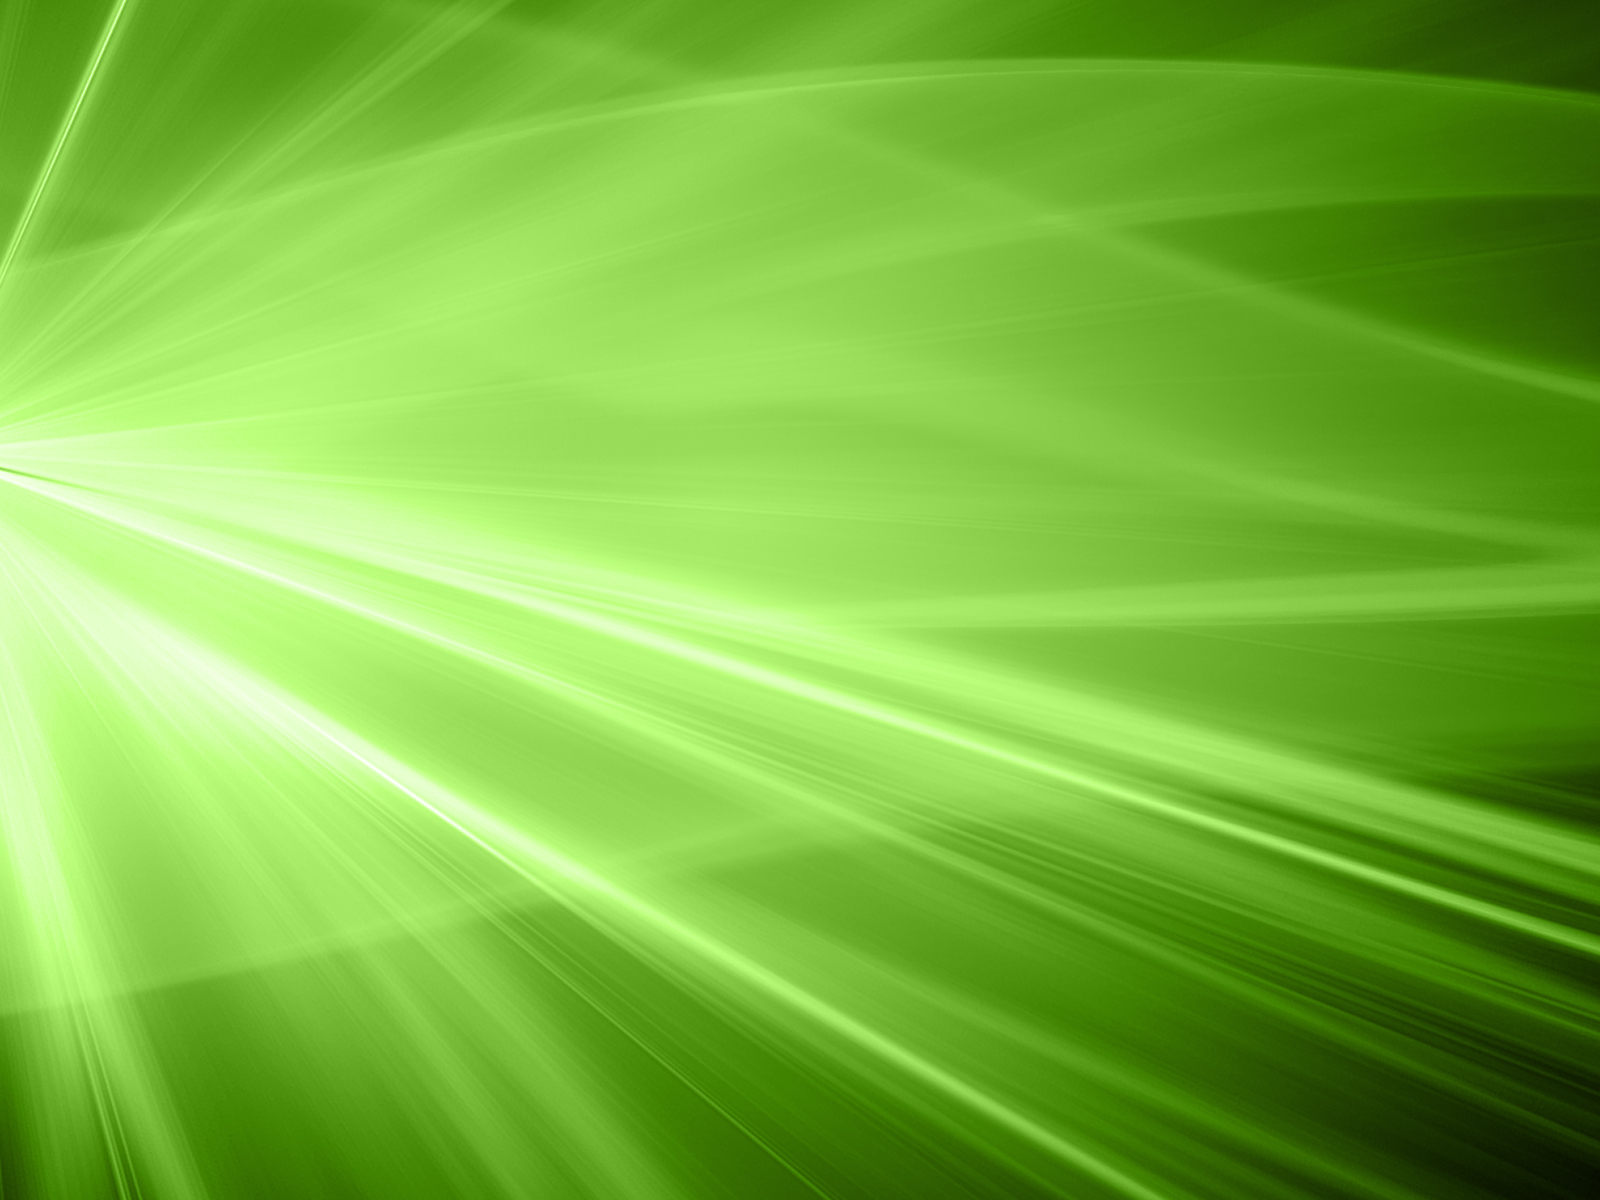 linux mint wallpapers linux wallpapers leave a comment on linux mint